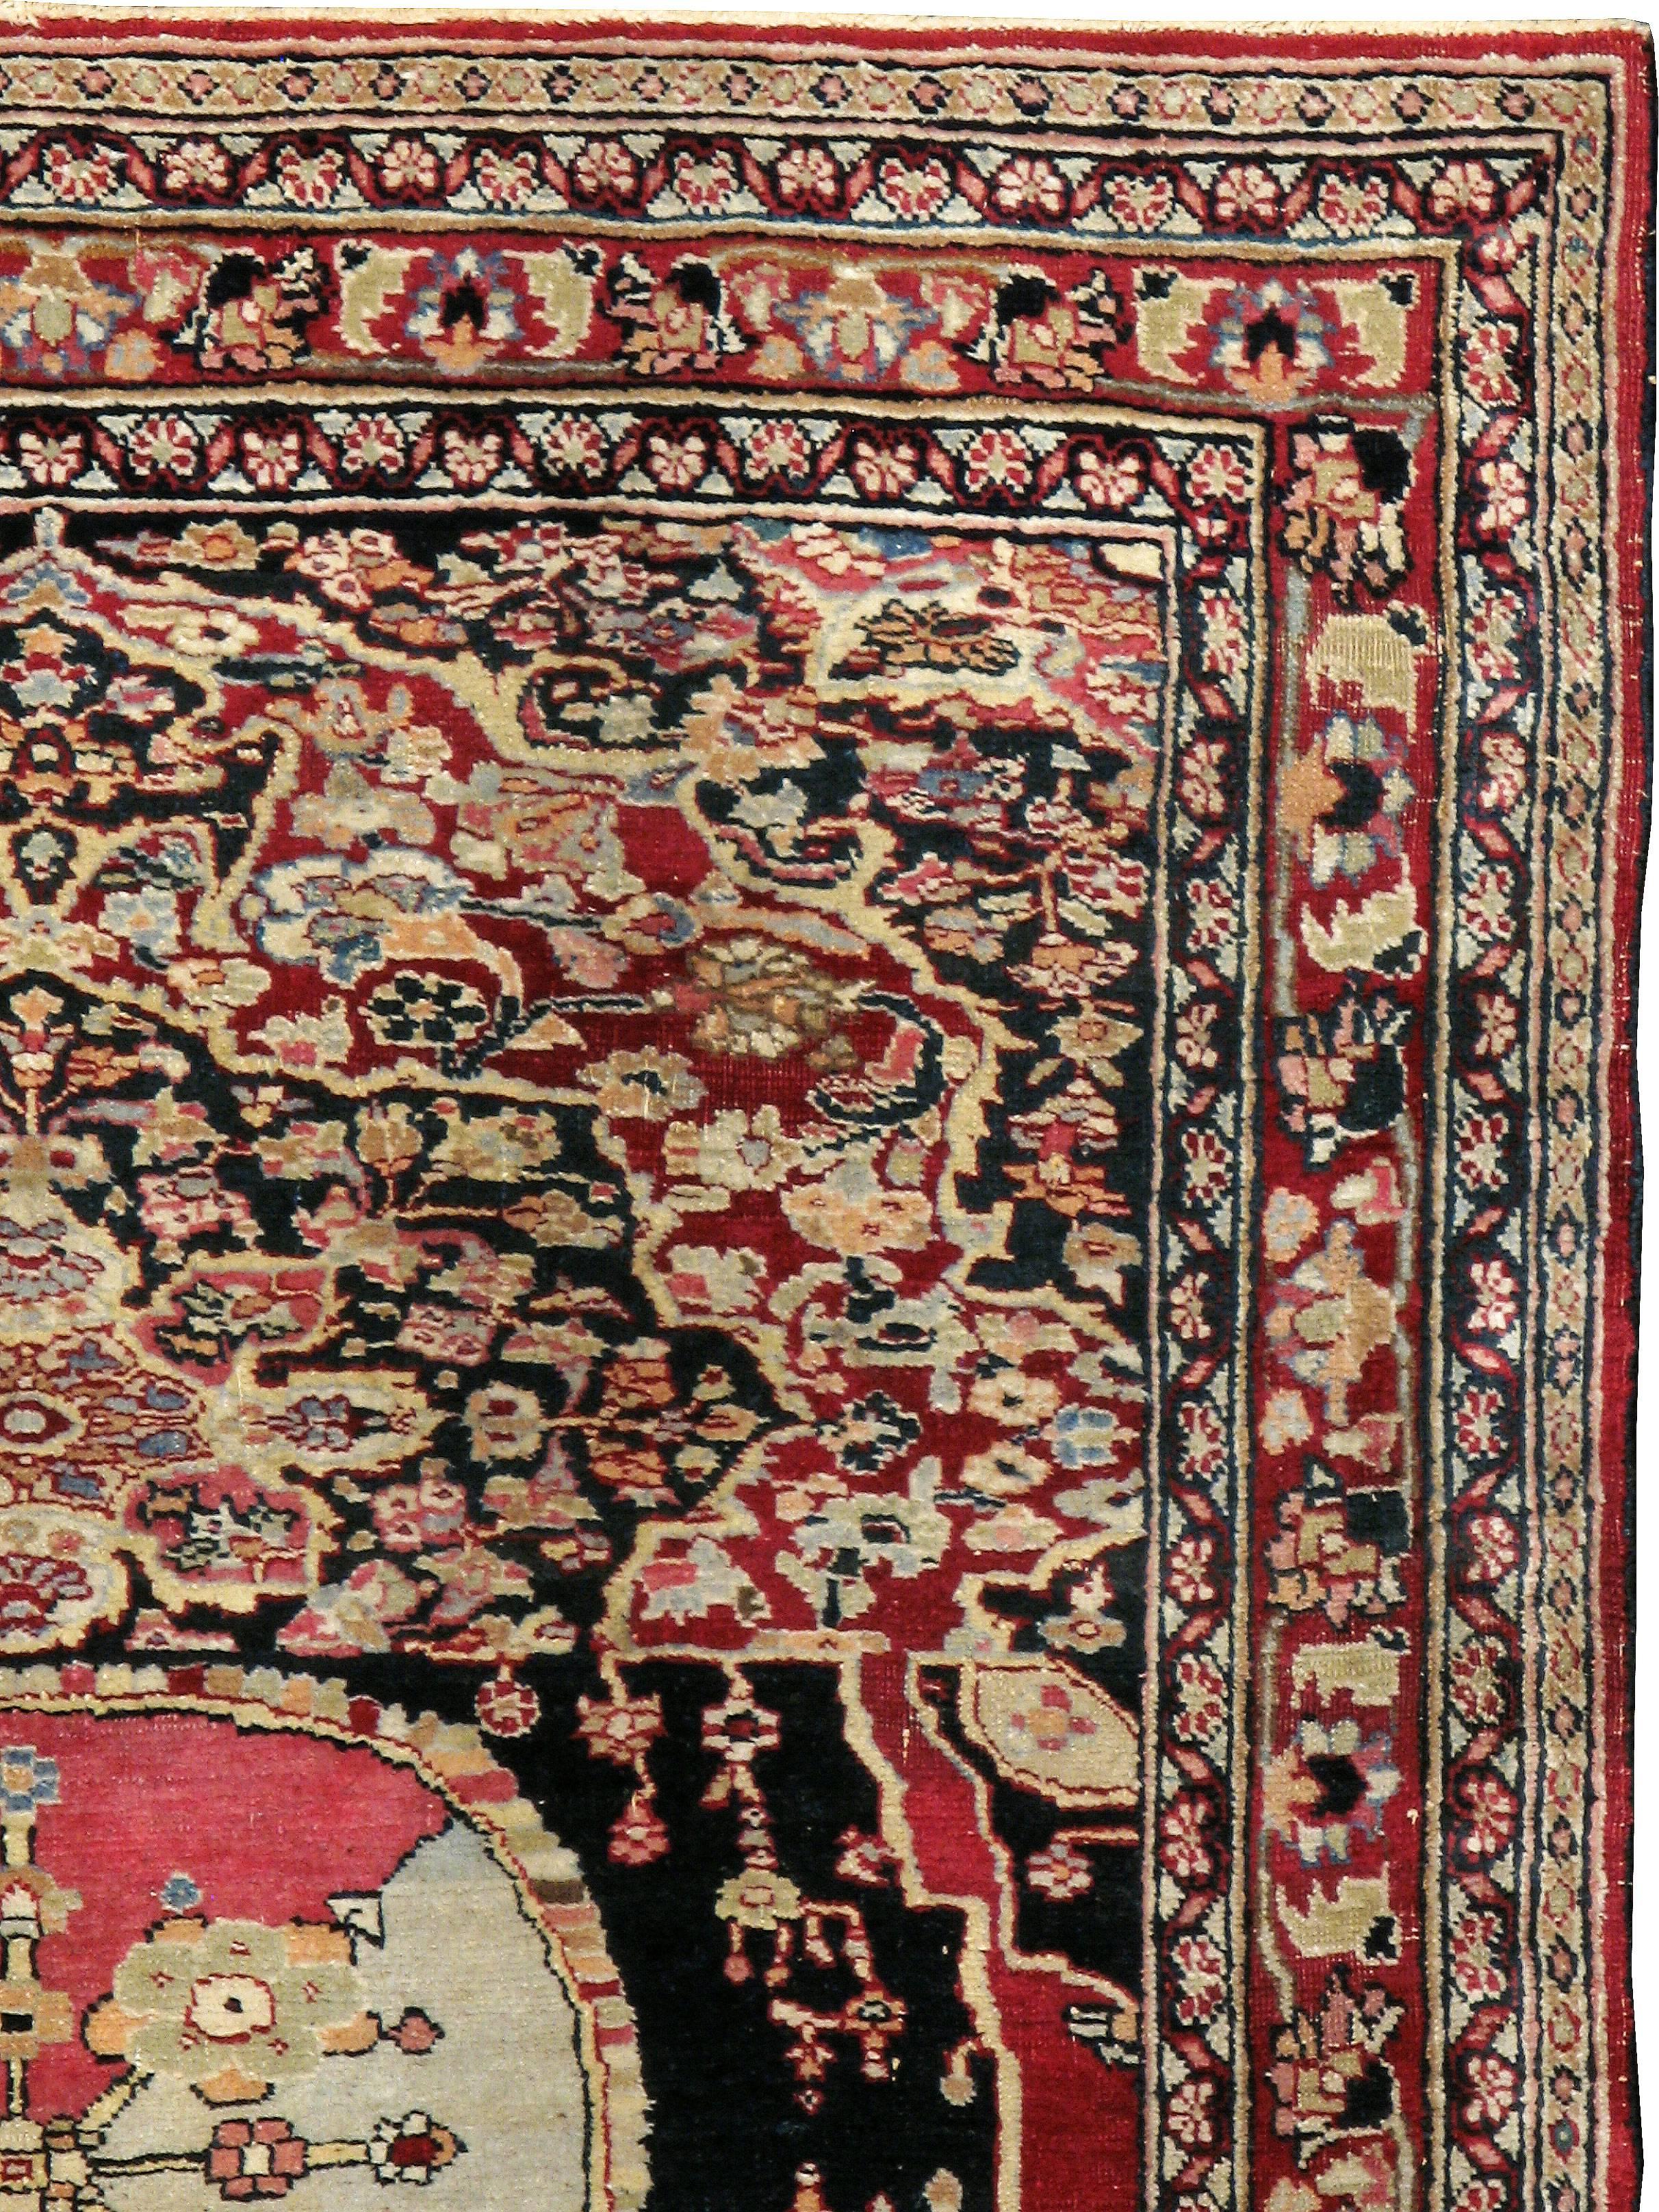 An antique Persian Mashad carpet from the second quarter of the 20th century.